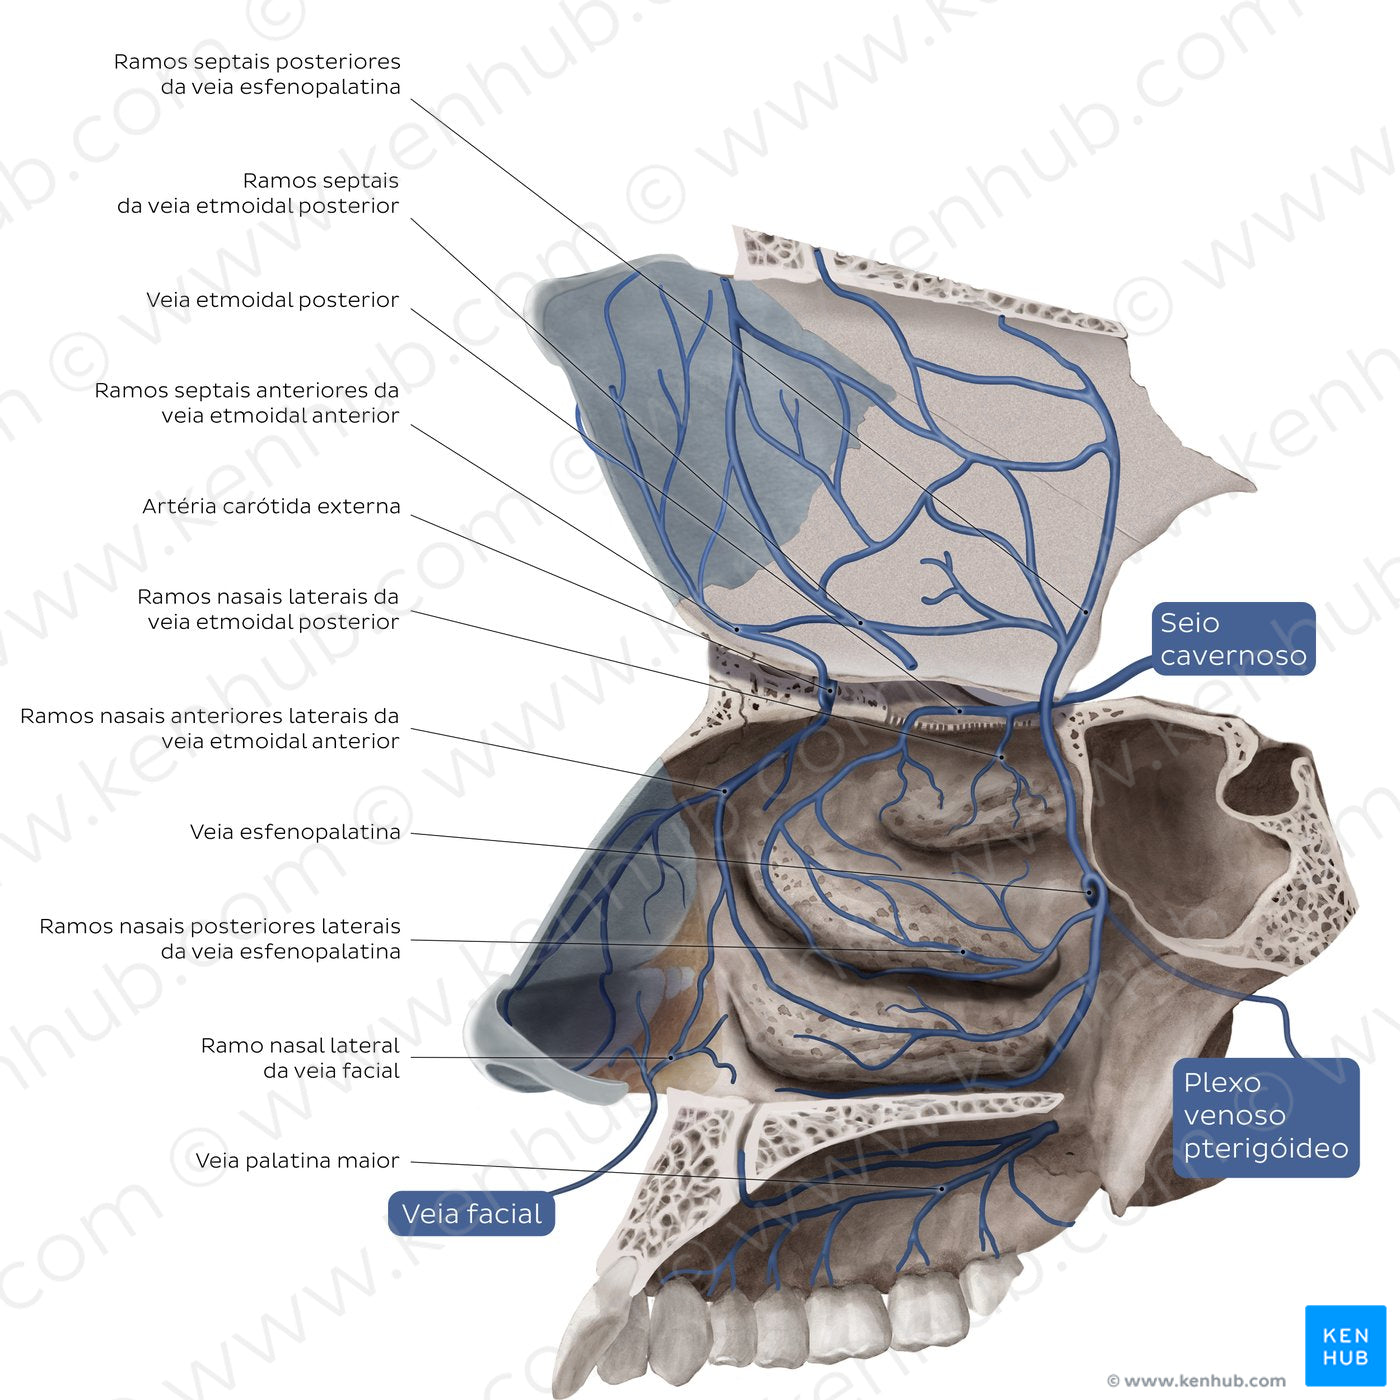 Veins of the nasal cavity (Portuguese)